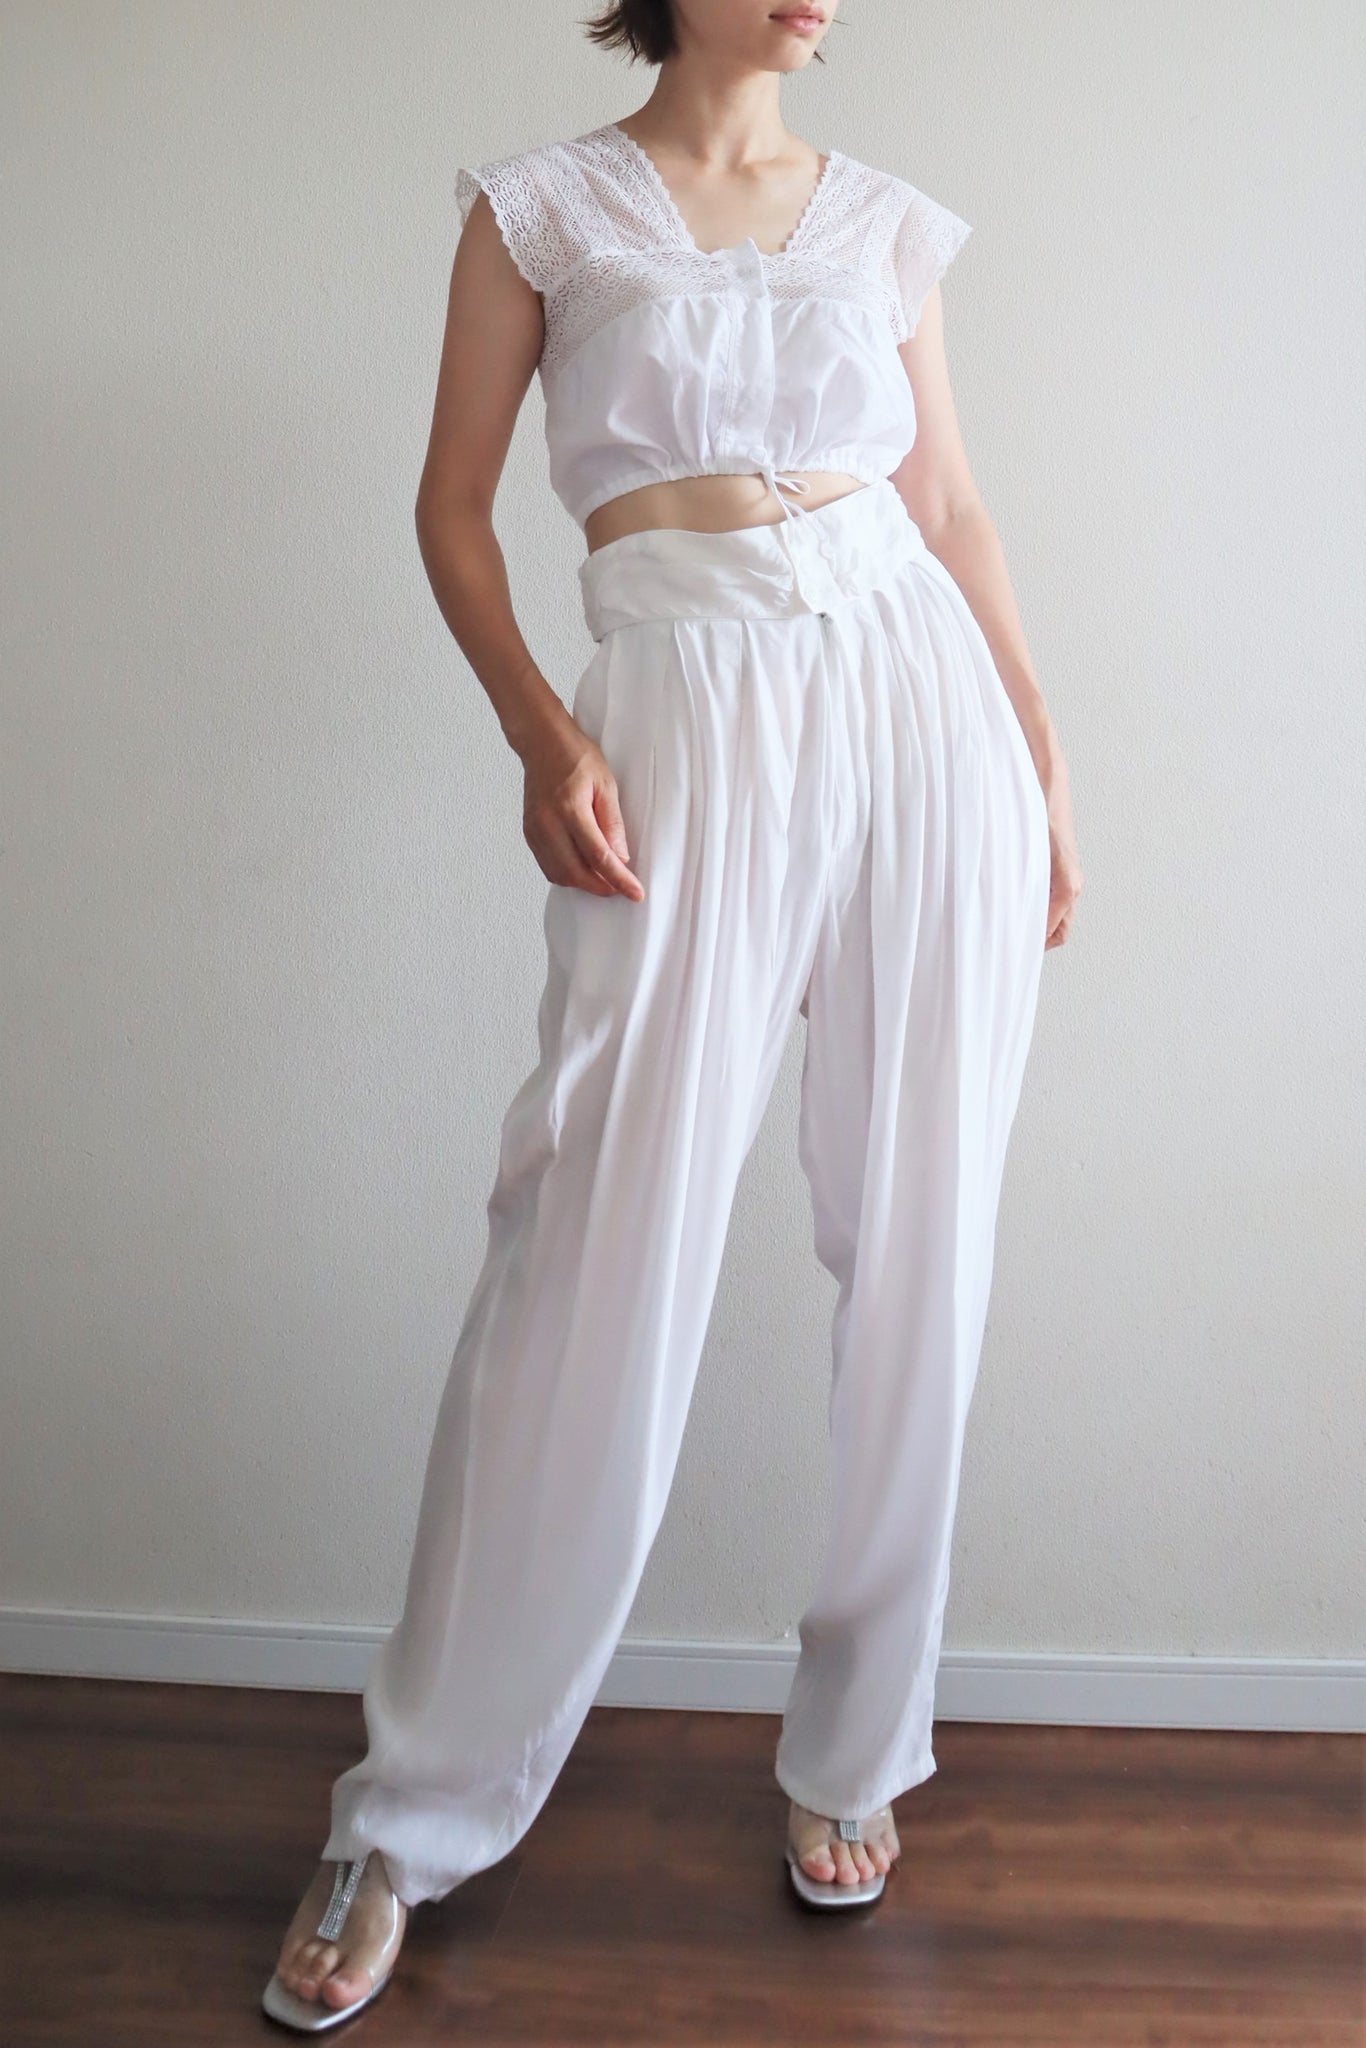 1980s Pure White Tapered Pants